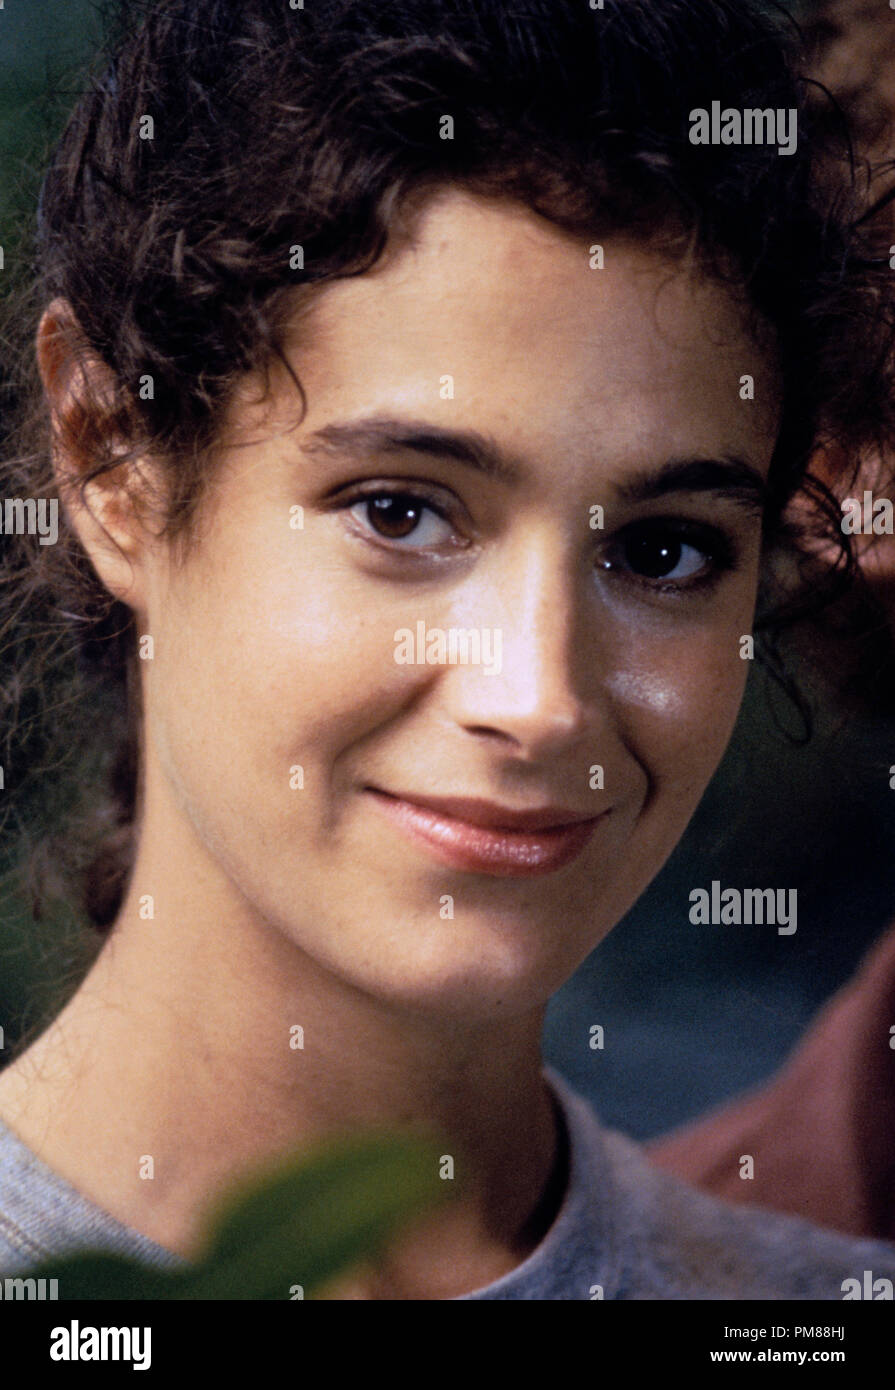 Pictures sean young 41 Hottest